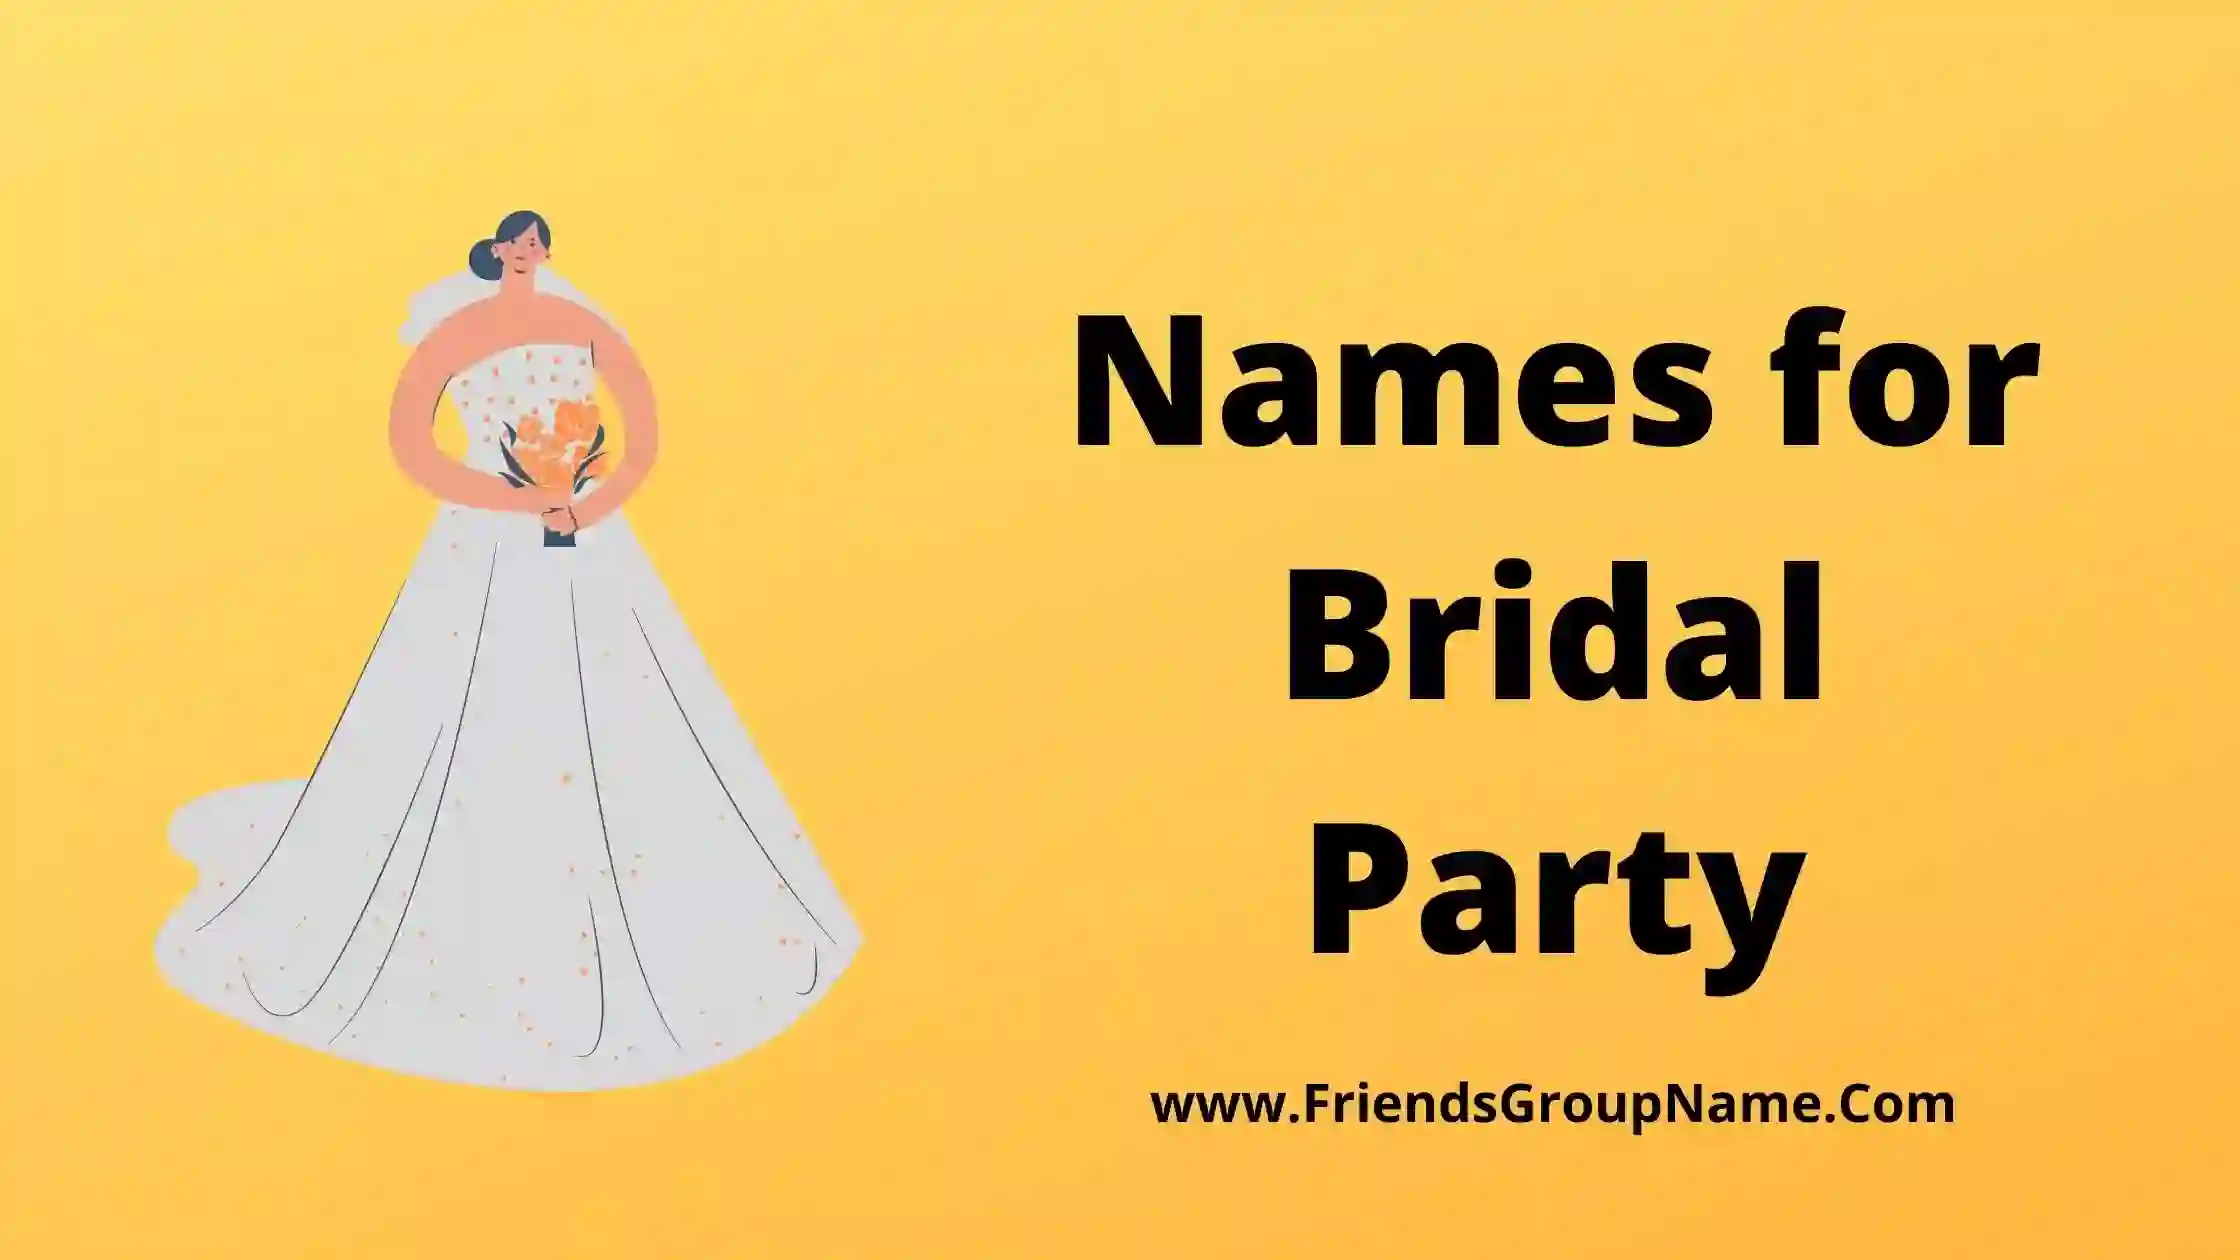 Names for Bridal Party